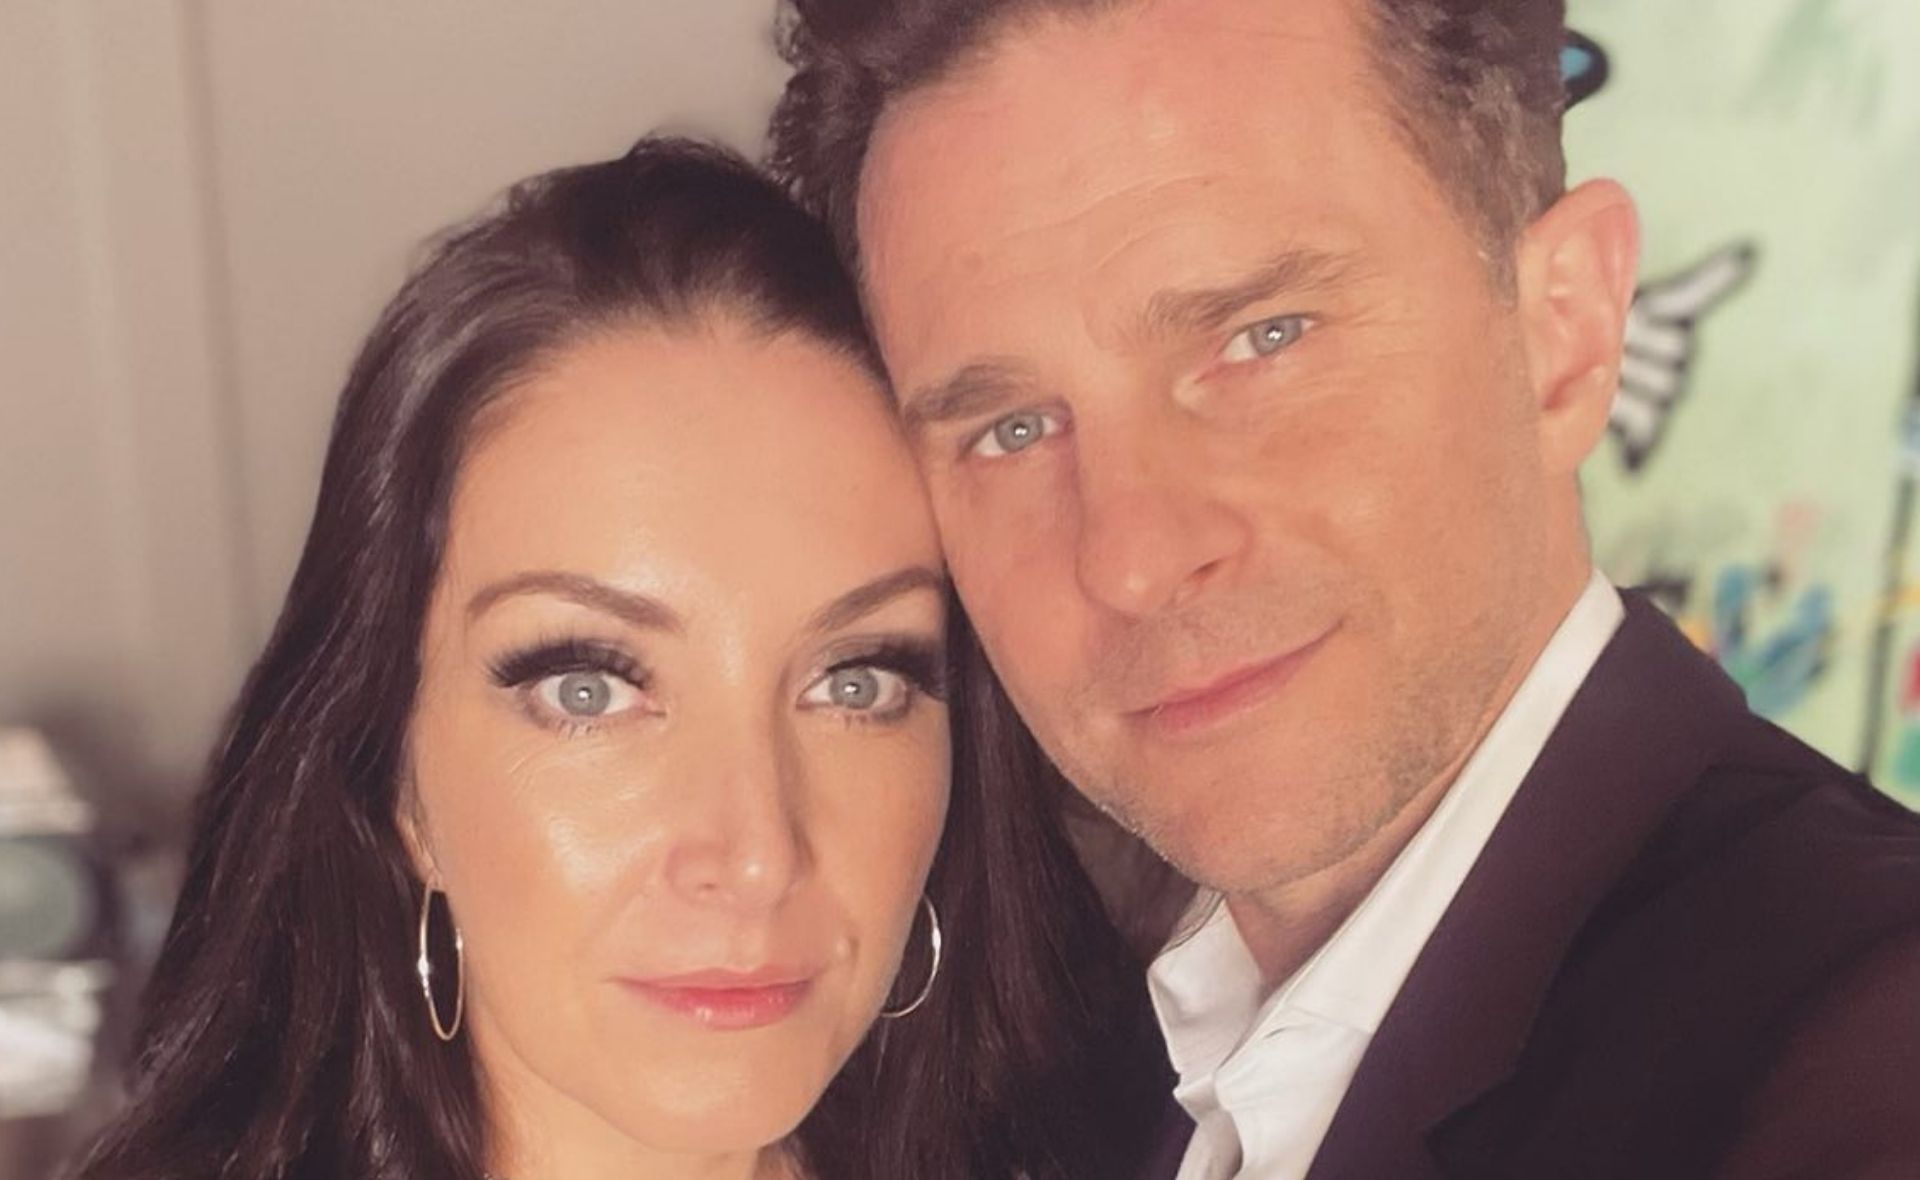 EXCLUSIVE: The “red flag” that appeared three weeks into David Campbell’s whirlwind romance with wife Lisa